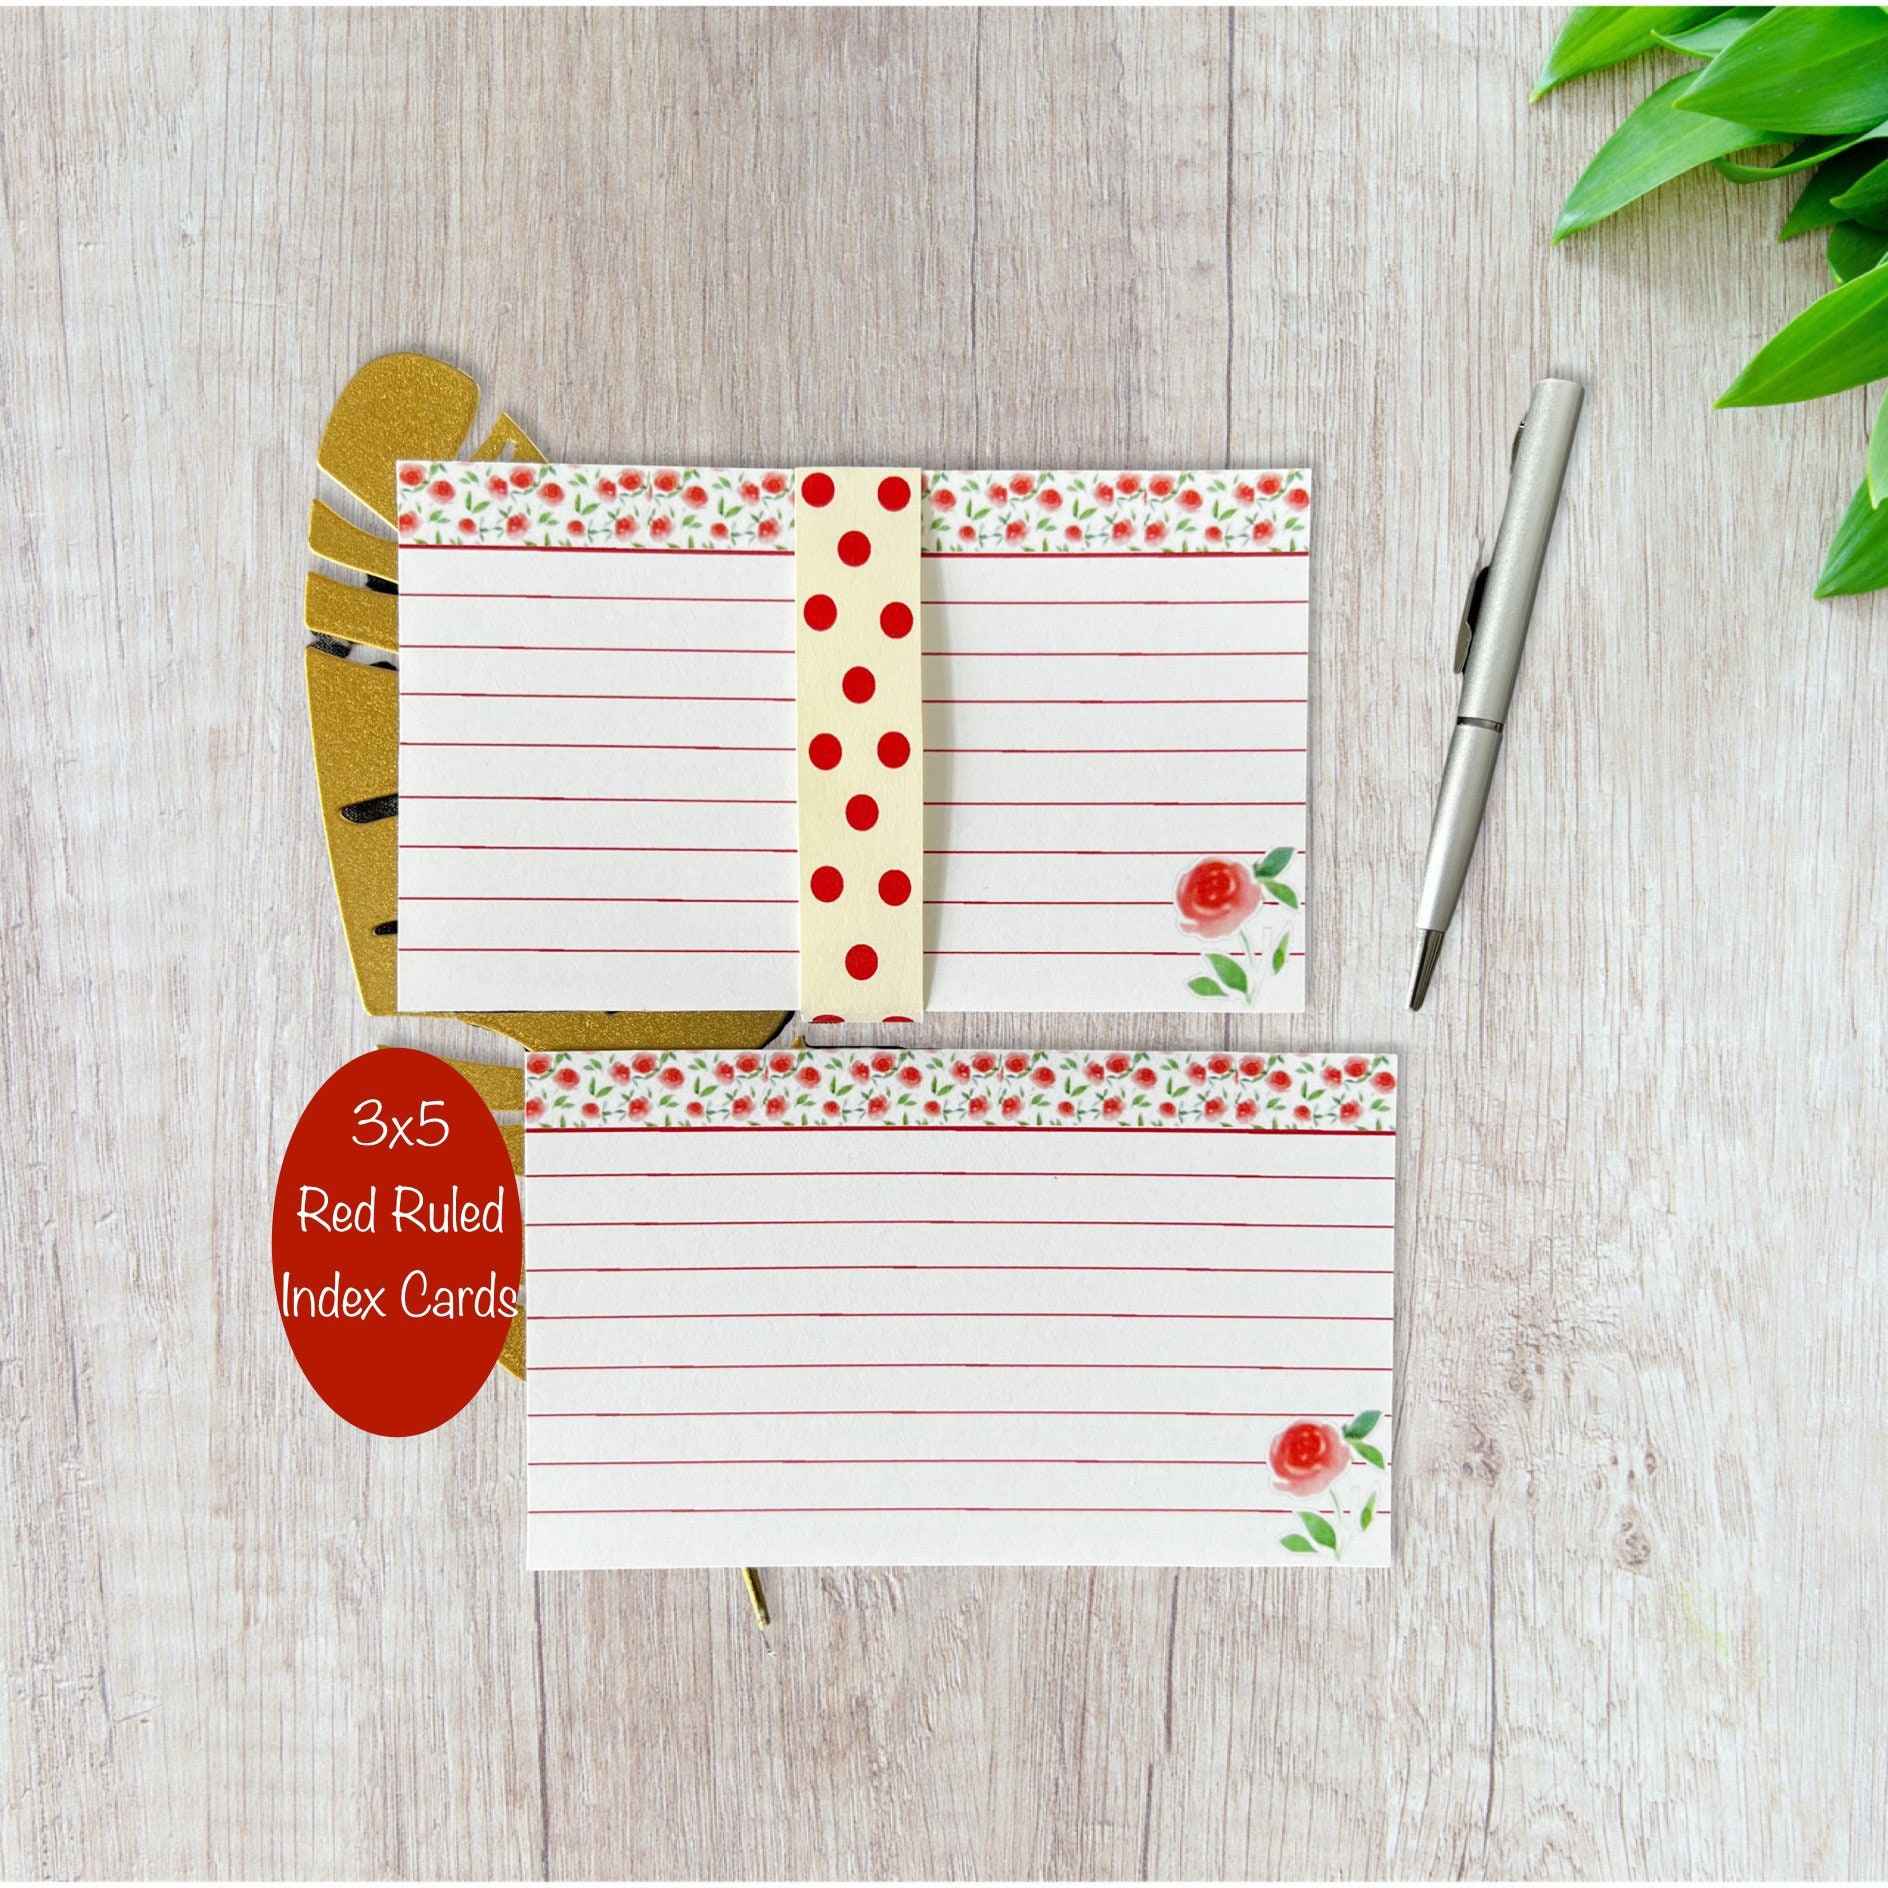 Printable 4x6 Index Card, Fillable Note Cards, Editable Index Cards. Blank  Index Cards, Index Card PDF, DIY Flashcard Template, SB037 